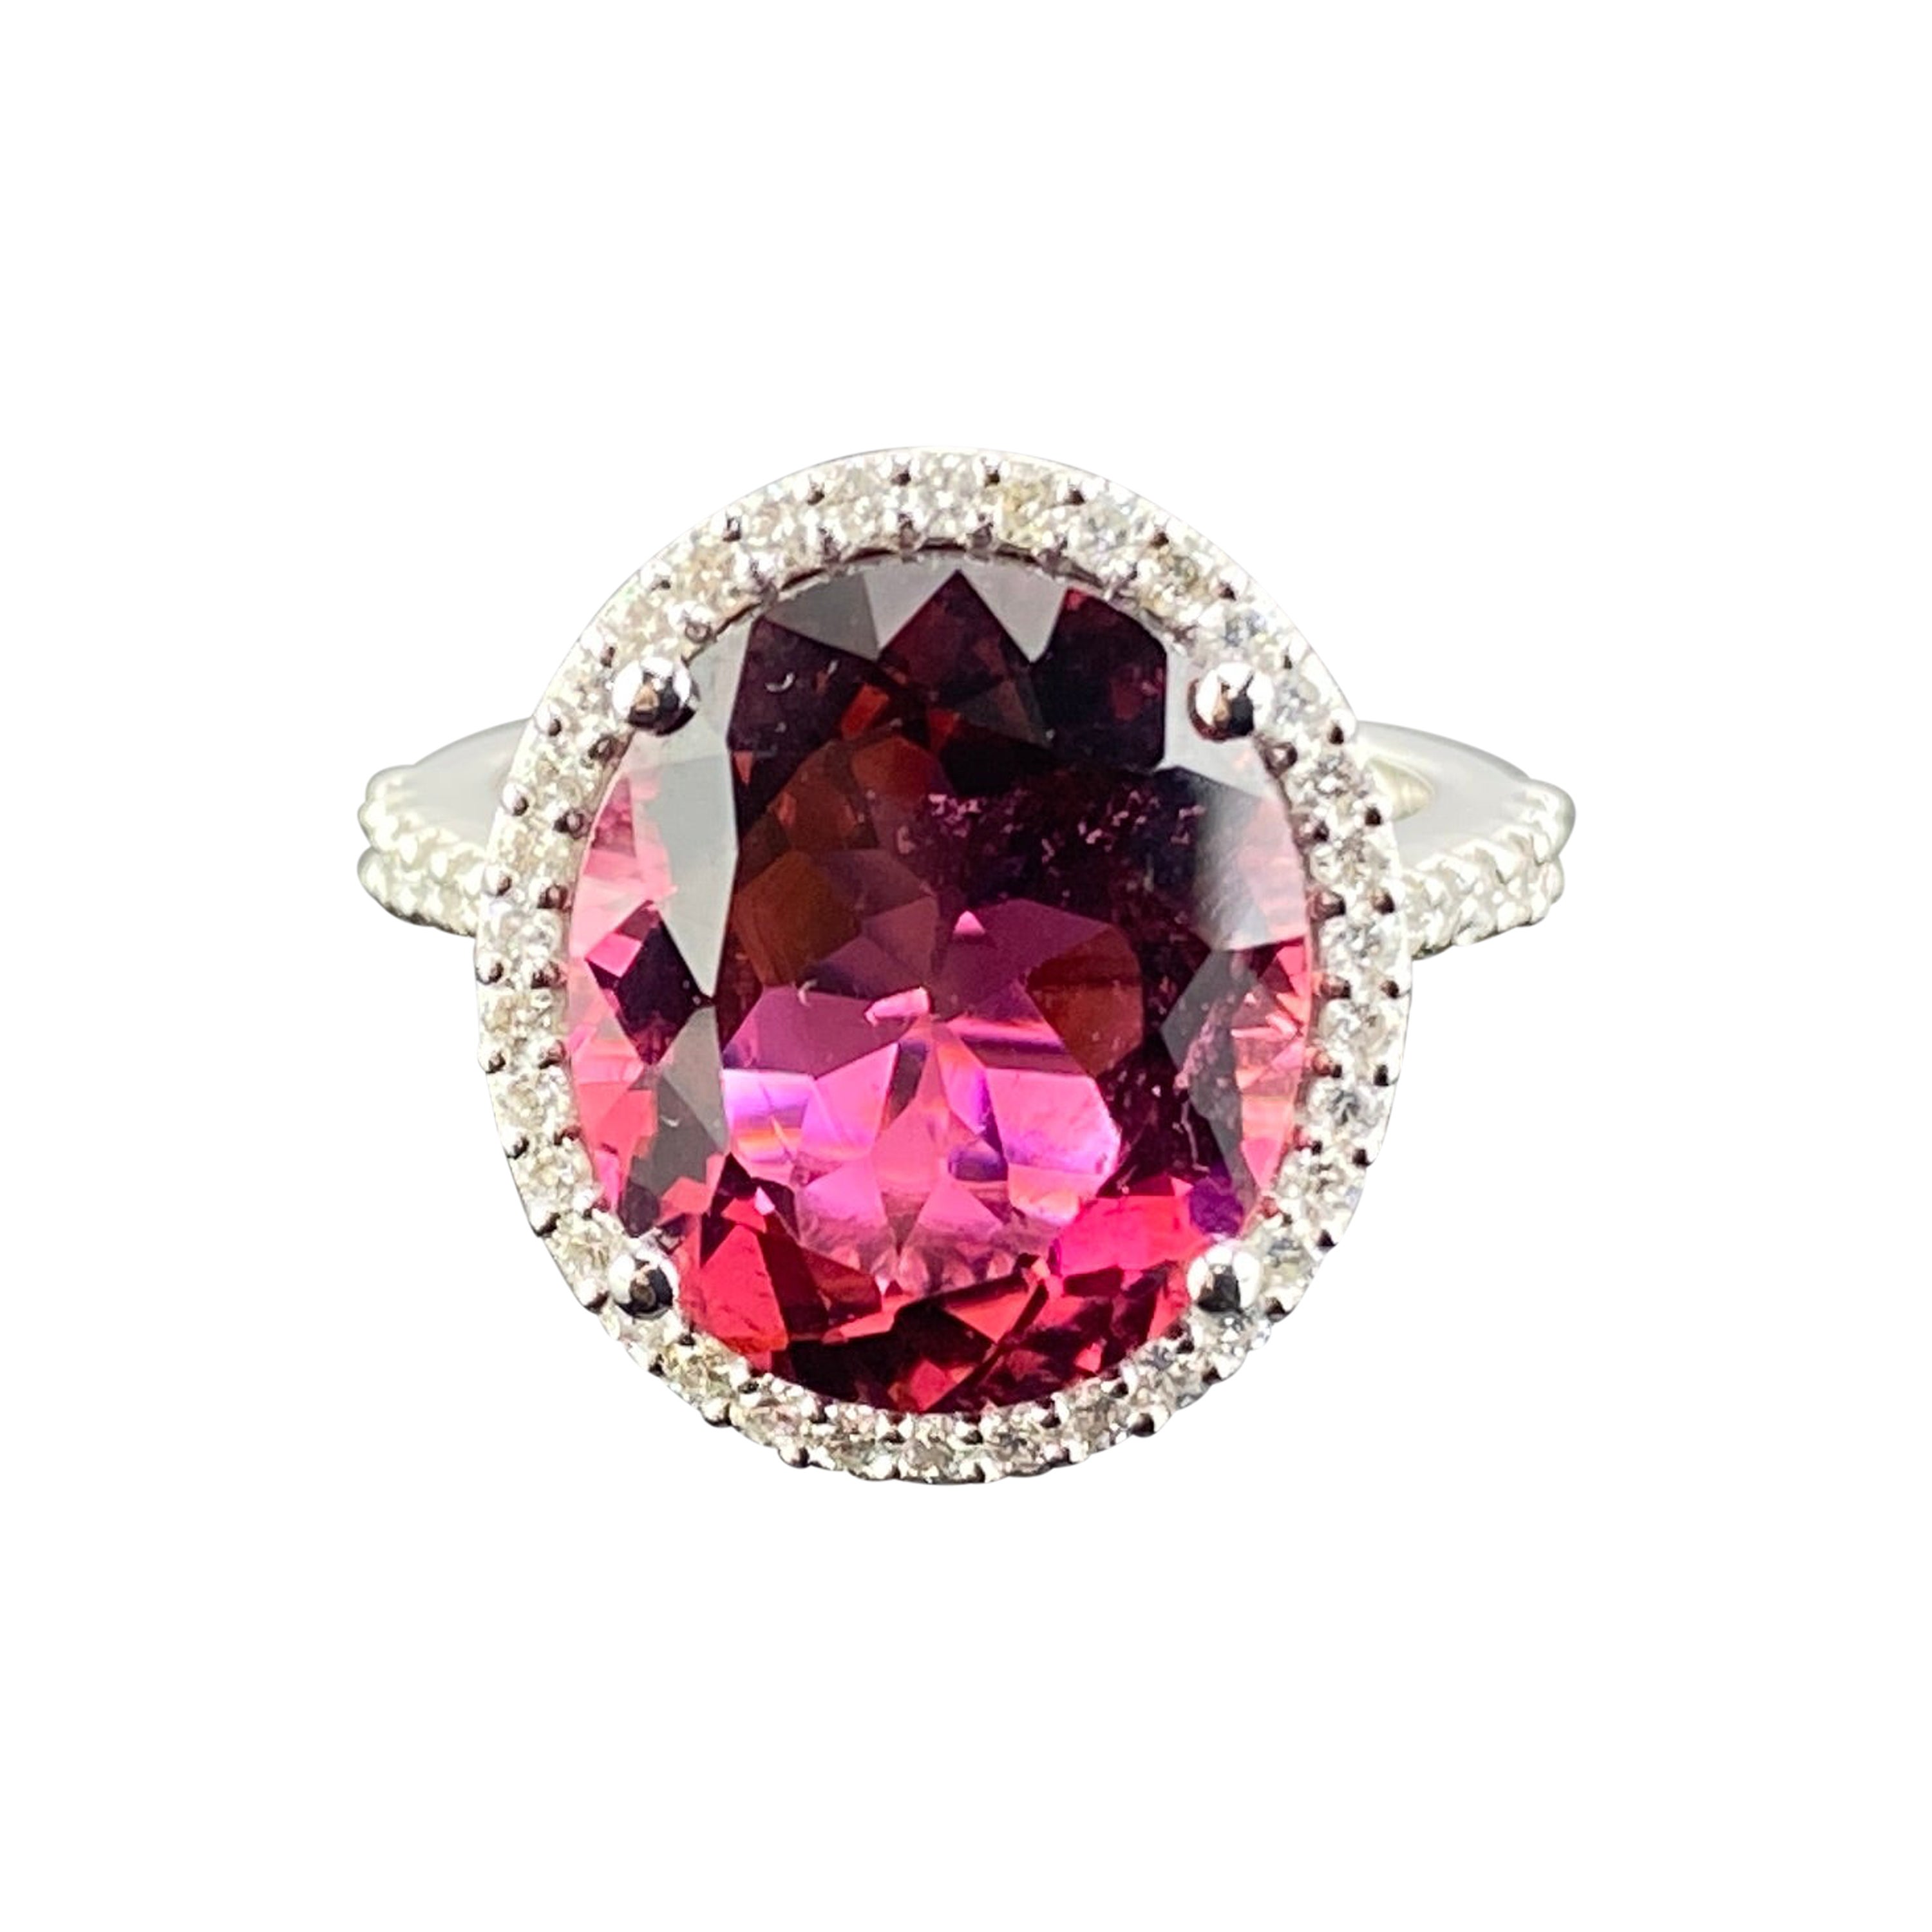 Certified 7.87 carat Pink Tourmaline Rubellite Engagement Ring For Sale